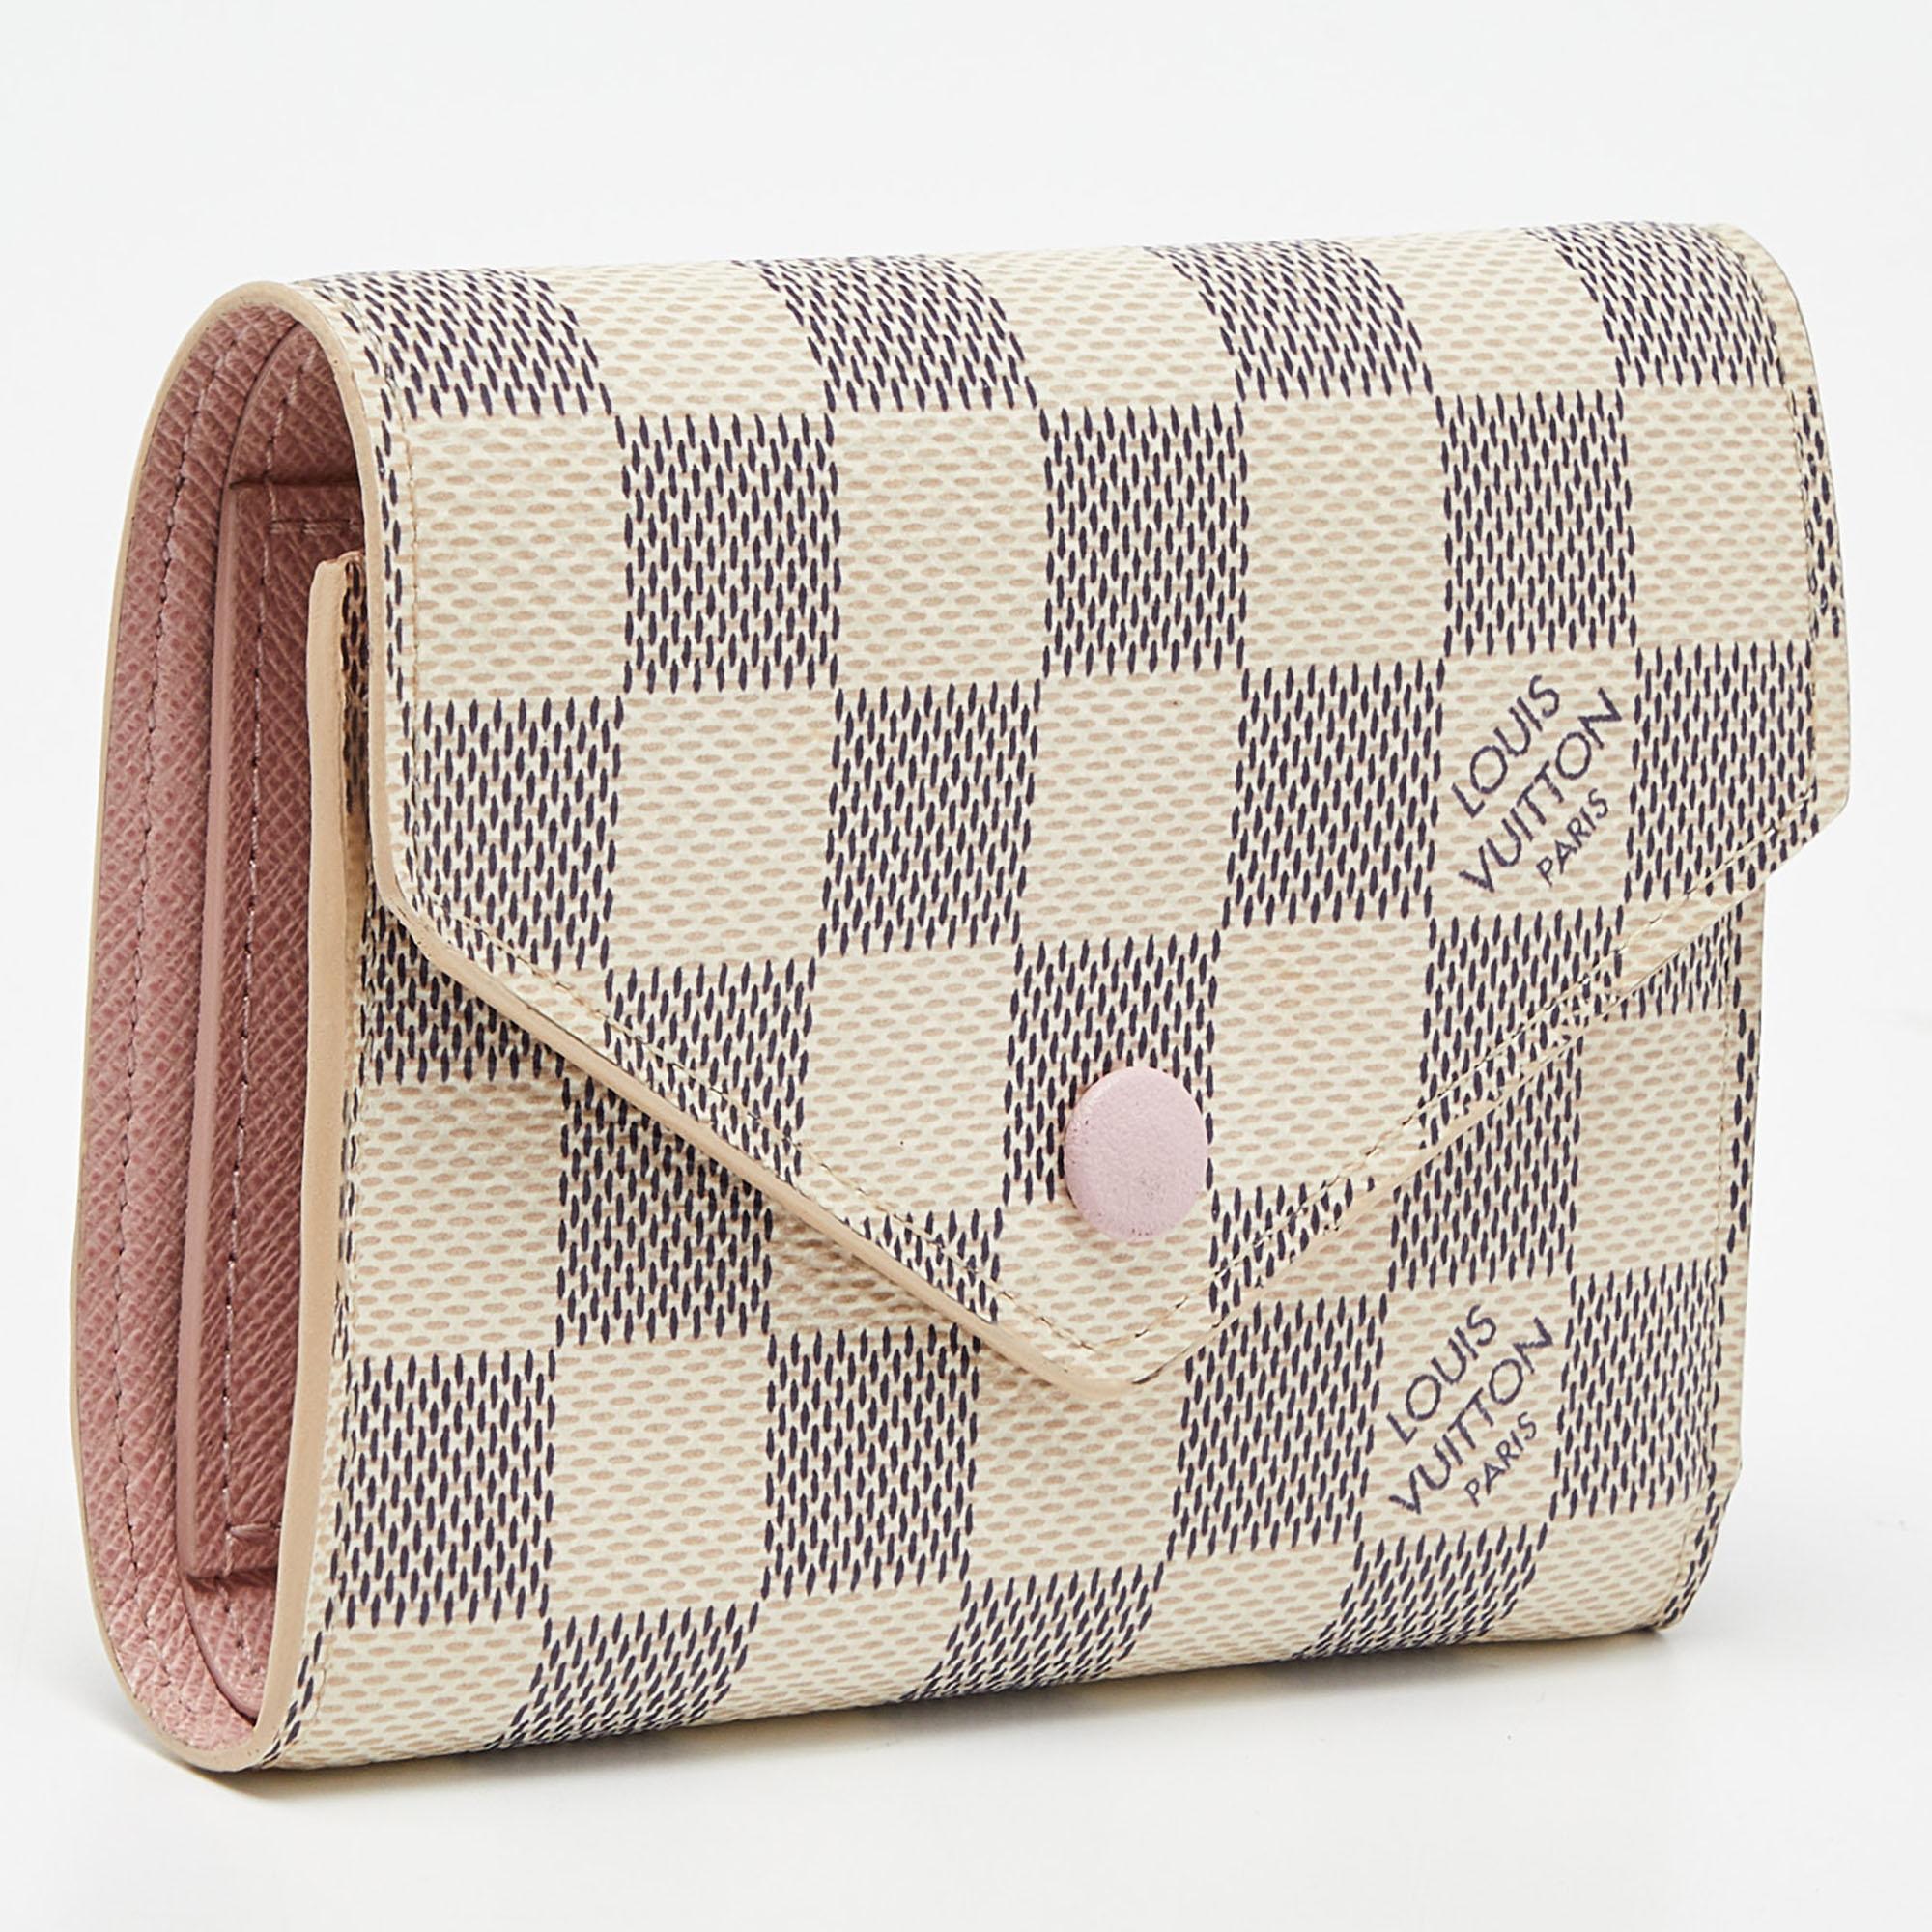 Basic essentials can be carried effortlessly in this feminine and functional Victorine wallet by Louis Vuitton. This compact wallet is crafted from the brand's iconic Damier Azur canvas with leather lining. It offers quick and secure access to